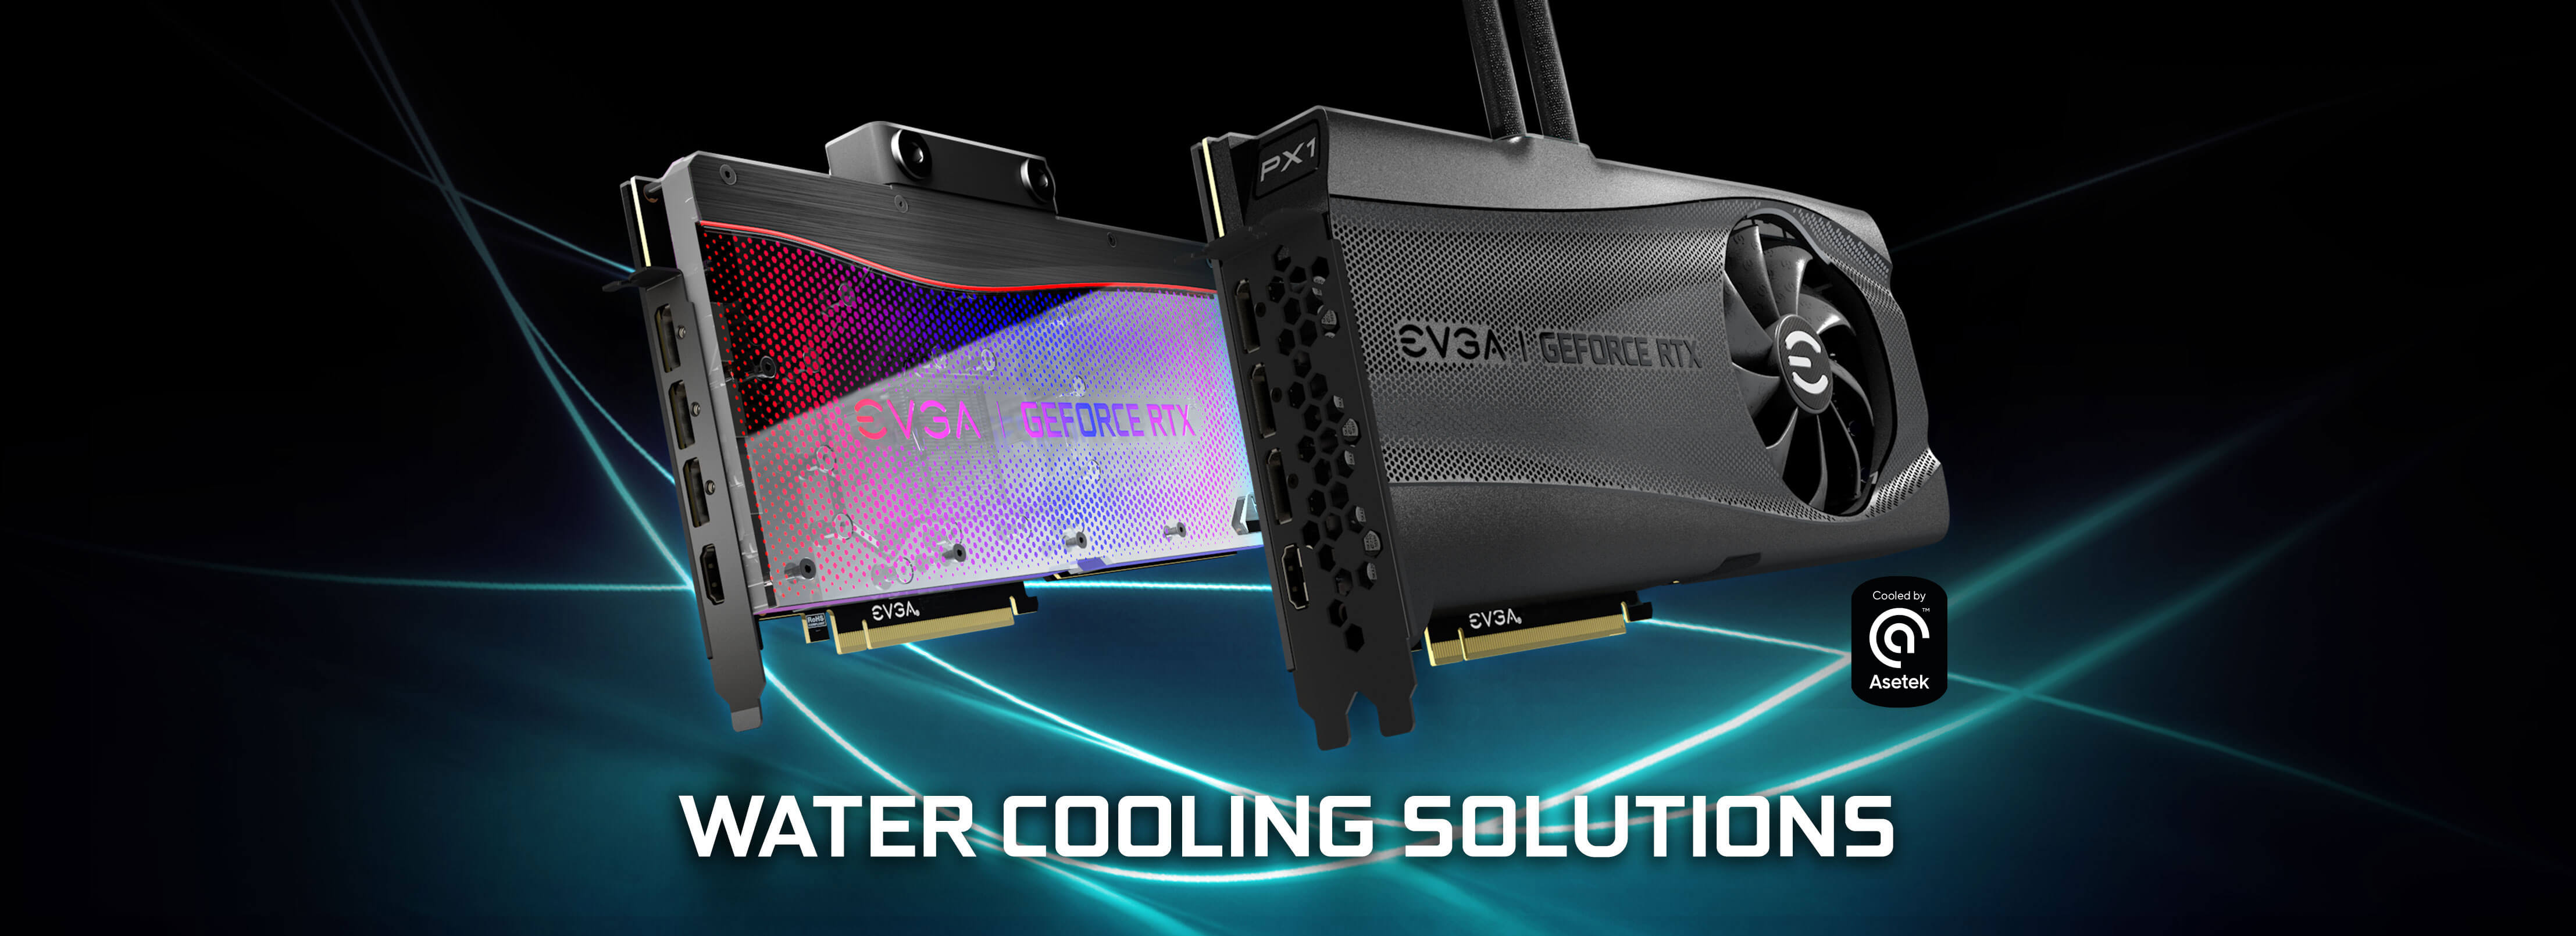 3090 / 3080 SERIES WATER COOLING SOLUTIONS